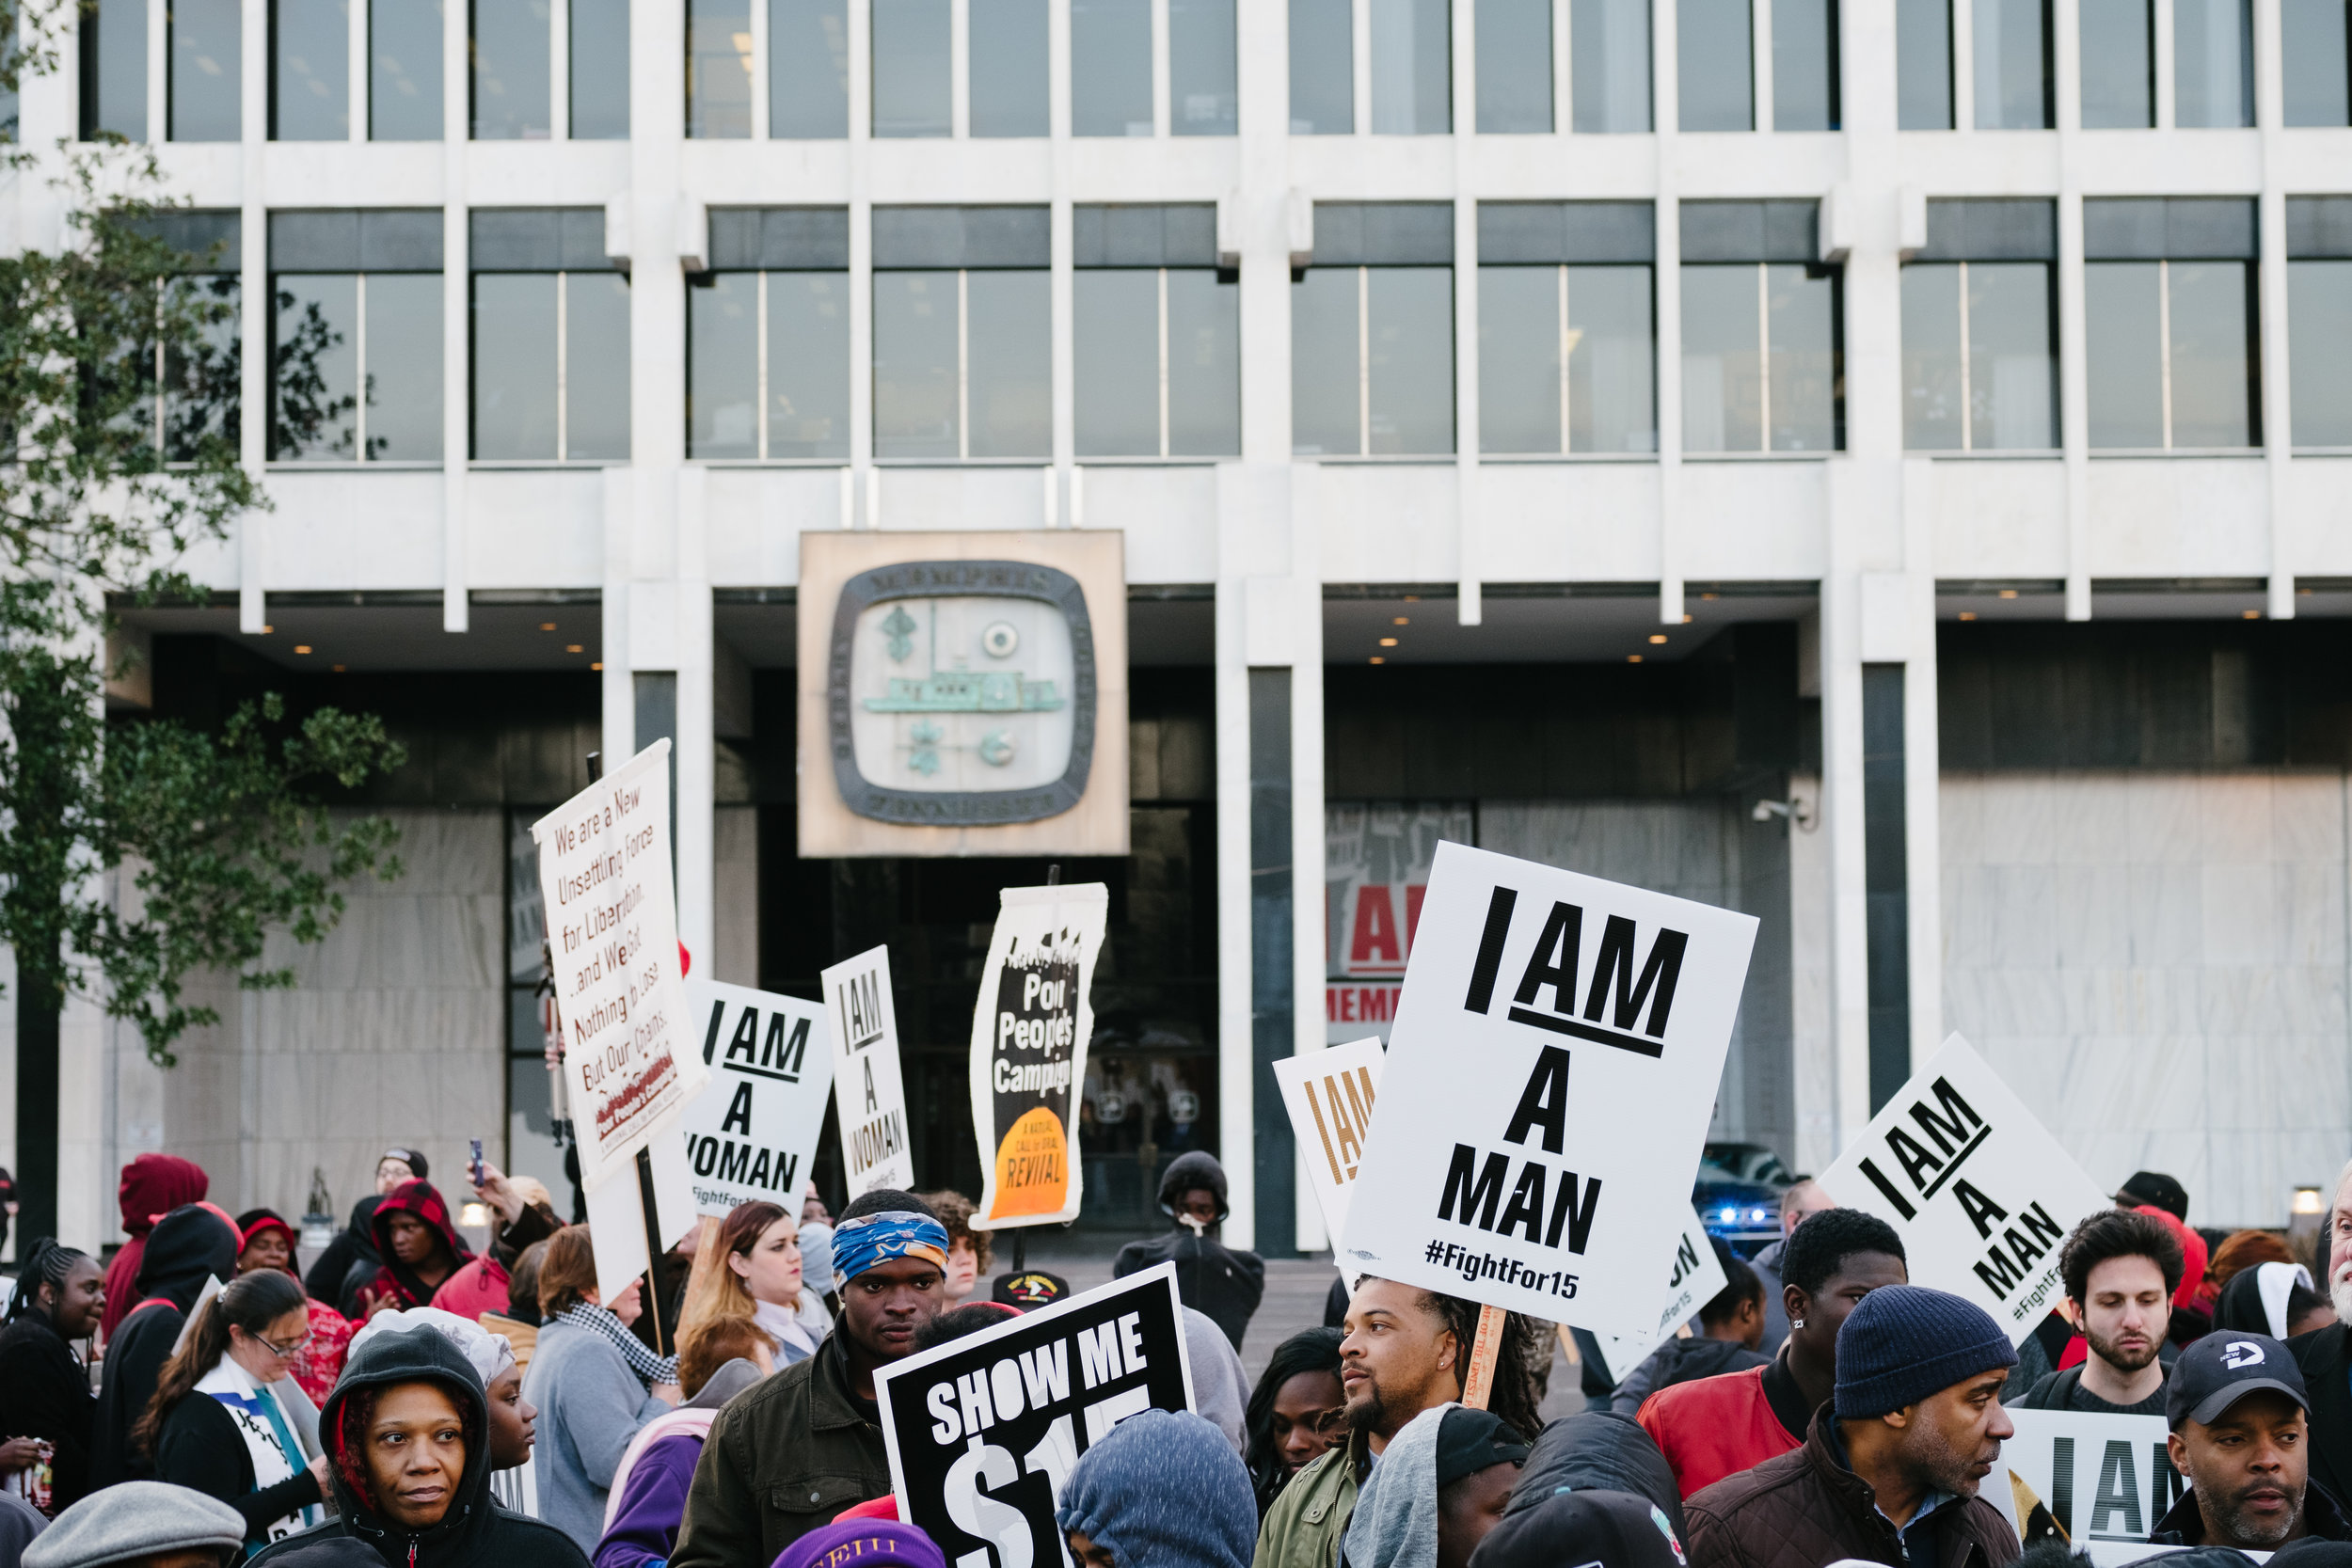  Hundreds gather to commemorate the 50th anniversary of the 1968 Memphis sanitation strike. The march, which was organized by Fight for $15 and the Poor People’s Campaign, began at Clayborne Temple and ended in front of City Hall. February 12, 2018. 